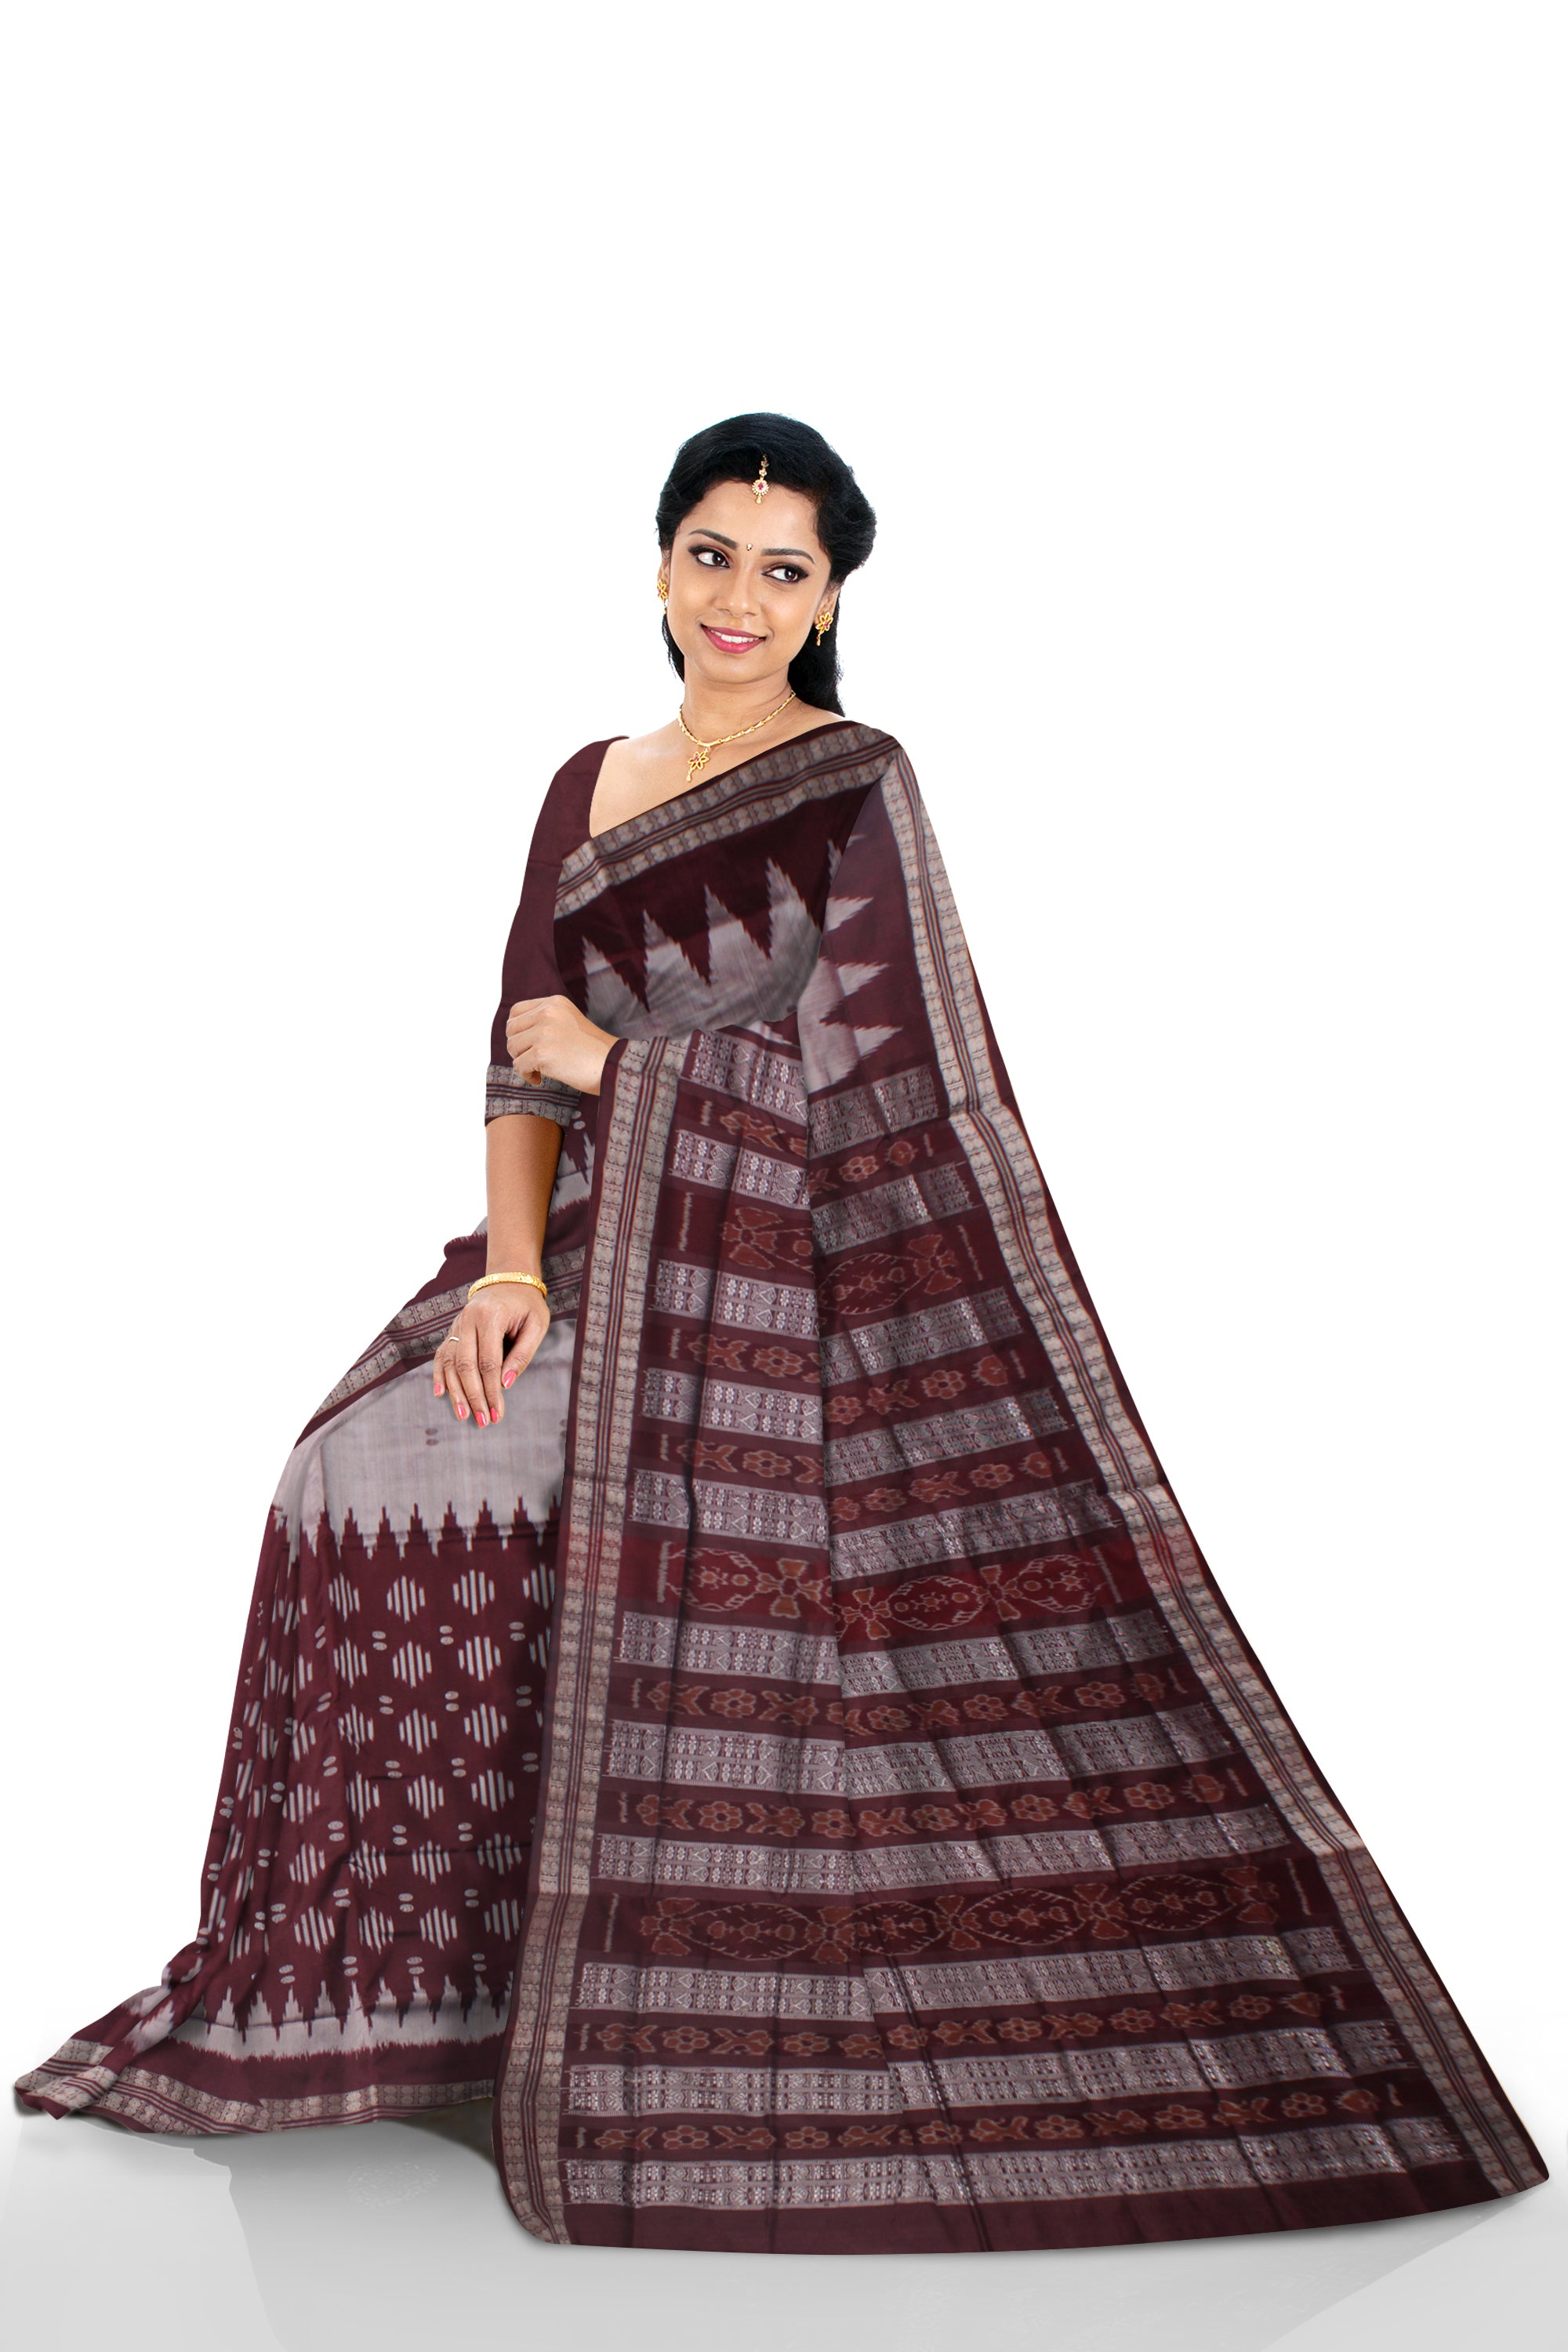 SILVER AND COFFEE COLOR IKAT PATTERN PATA SAREE, COMES WITH MATCHING BLOUSE PIECE. - Koshali Arts & Crafts Enterprise